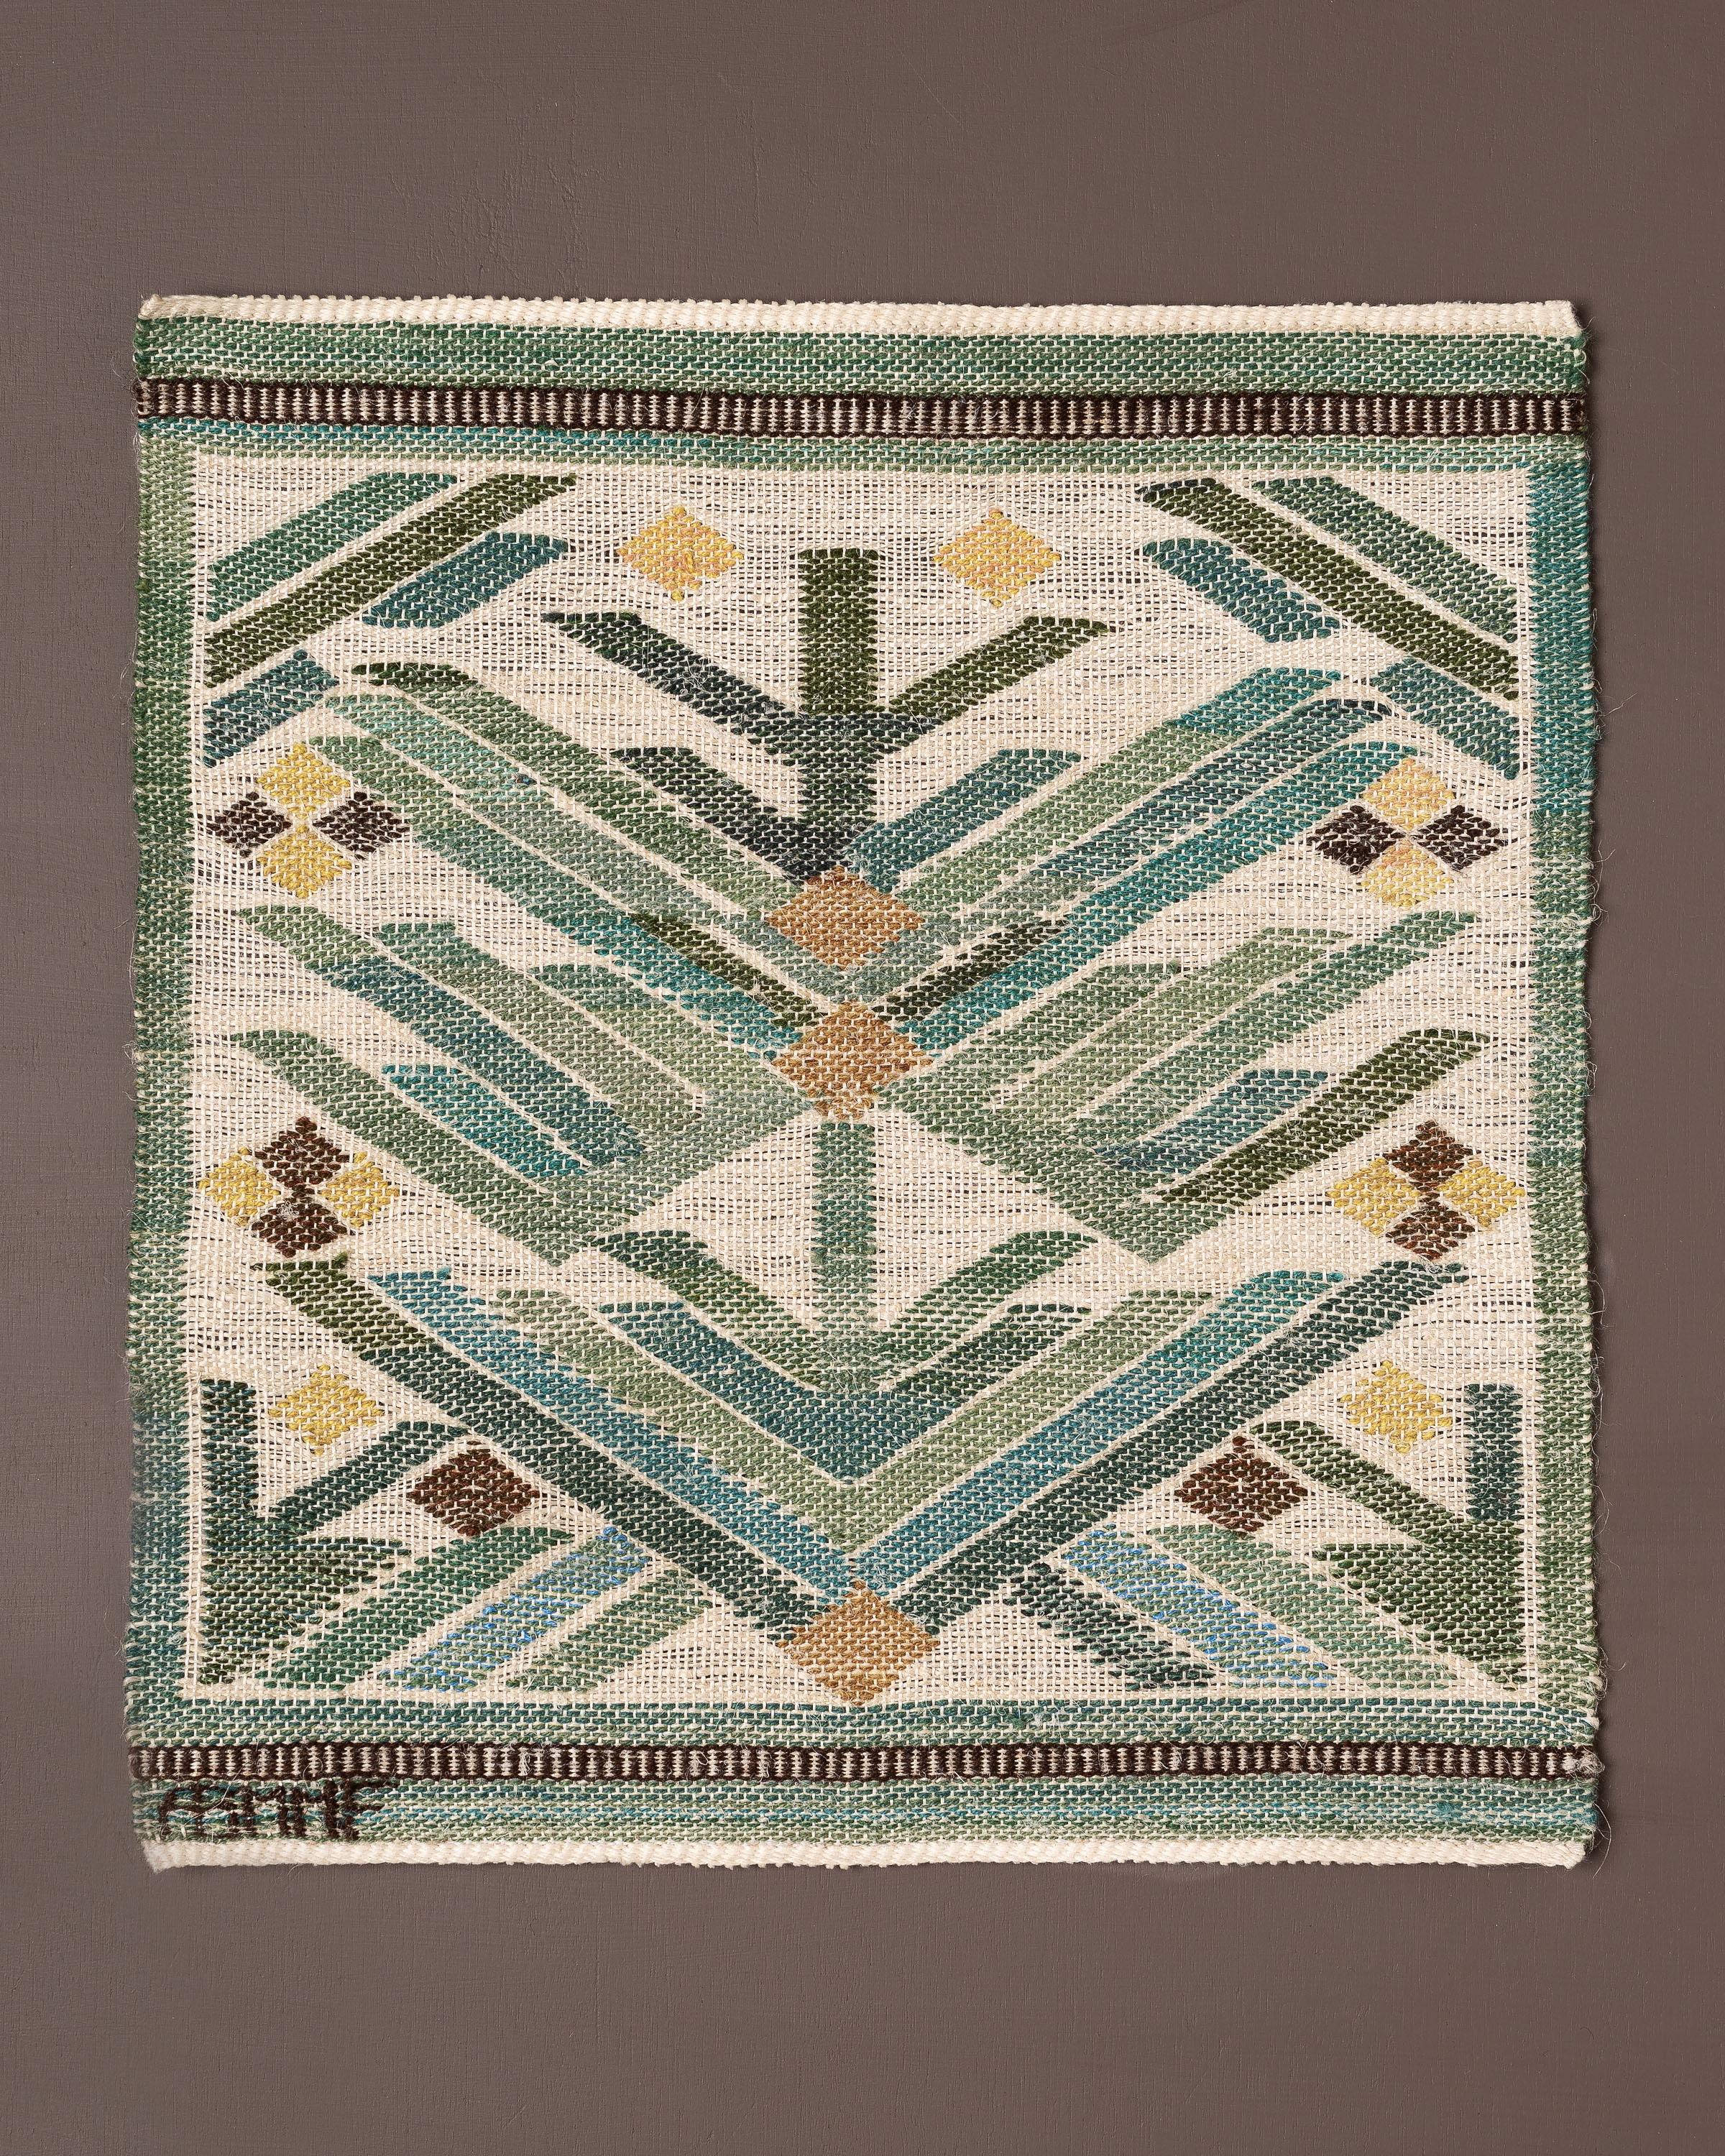 Handwoven tapestry depicting pine branch, designed by Märta Måås-Fjetterström. 

Woven in wool and linen on a linen warp and at the Märta Måås-Fjetterström studio in Båstad, Sweden. 

The tapestry can be framed, mounted as a decorative pillow, or